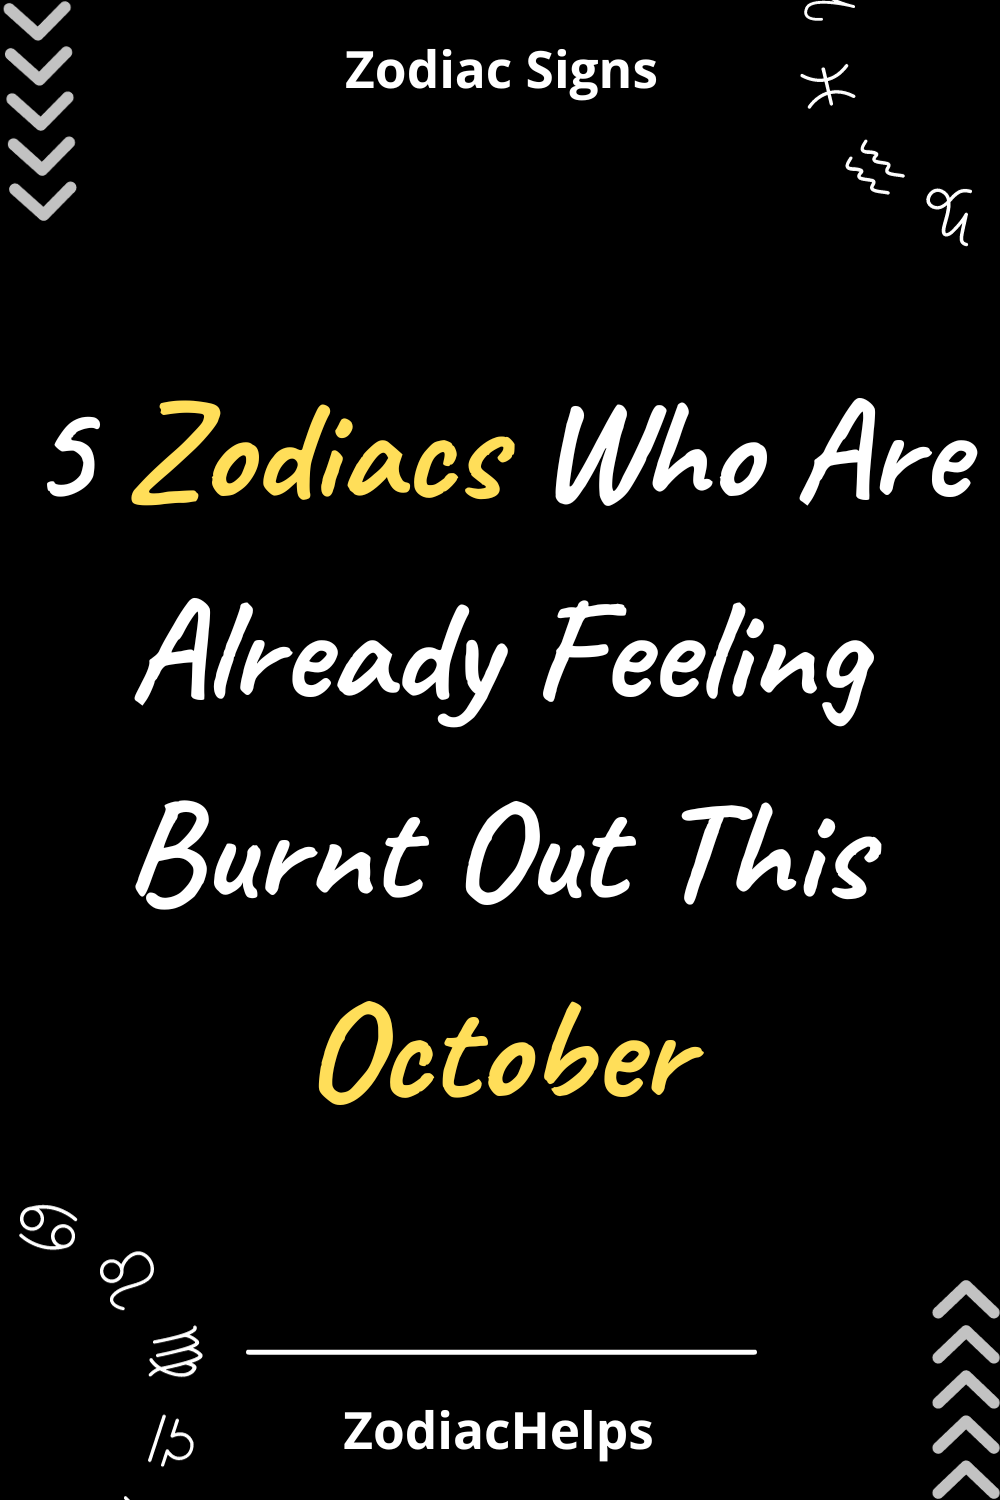 5 Zodiacs Who Are Already Feeling Burnt Out This October